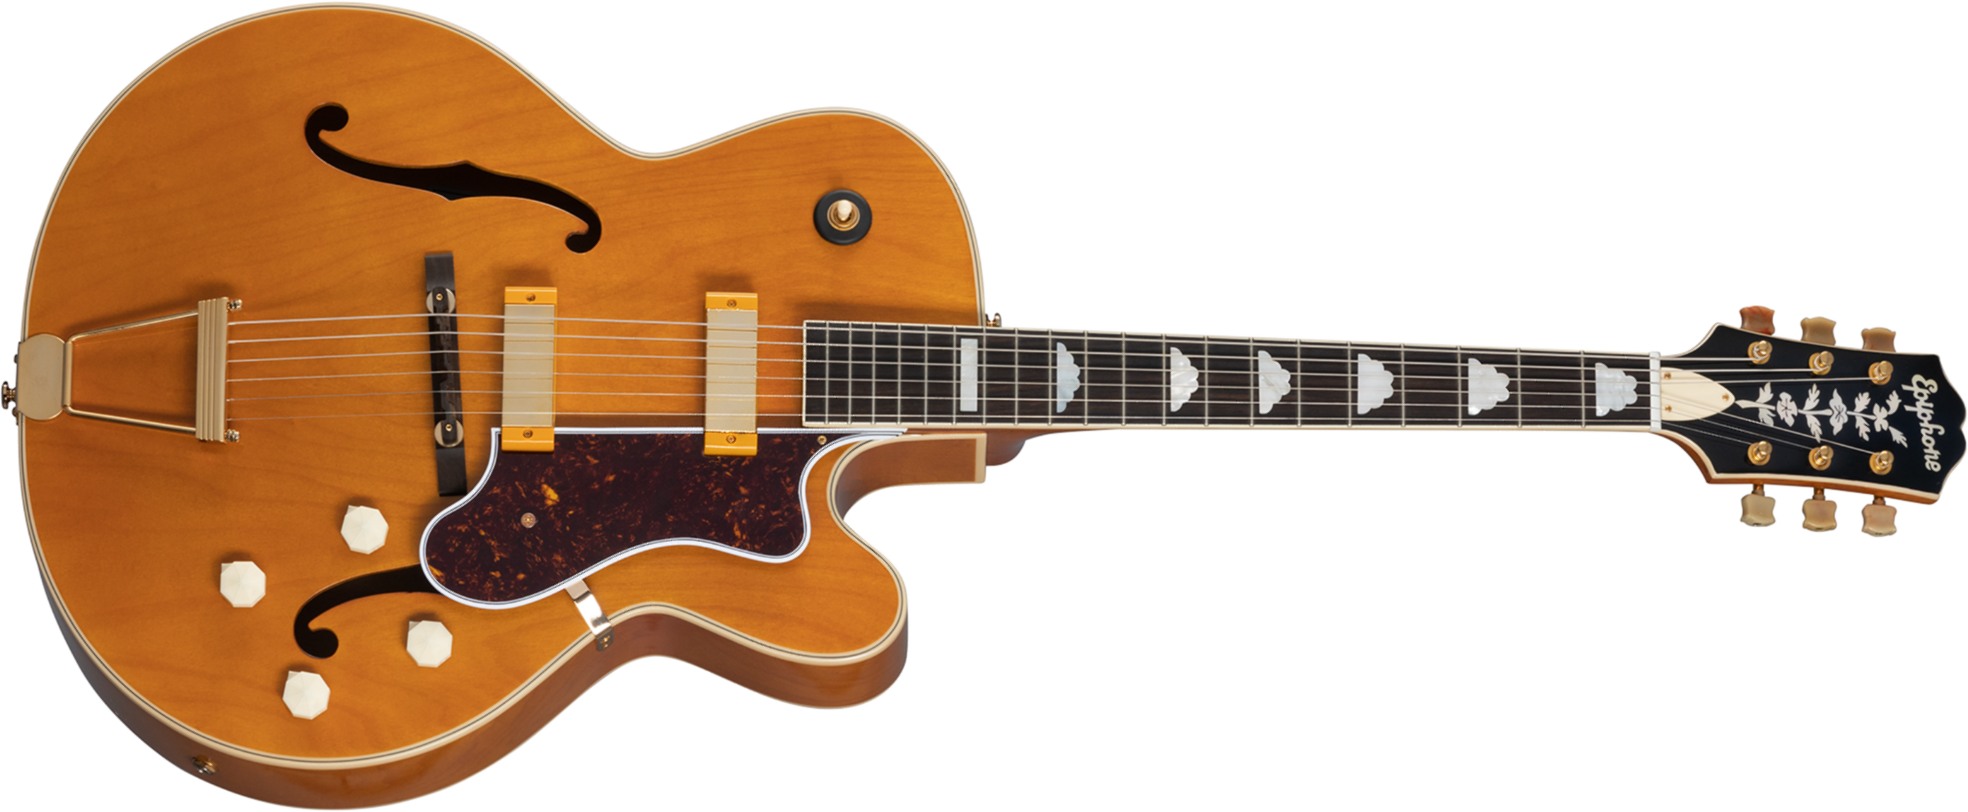 Epiphone Zephyr Deluxe Regent 150th Anniversary 2mh Ht Lau - Aged Antique Natural - Semi-hollow electric guitar - Main picture